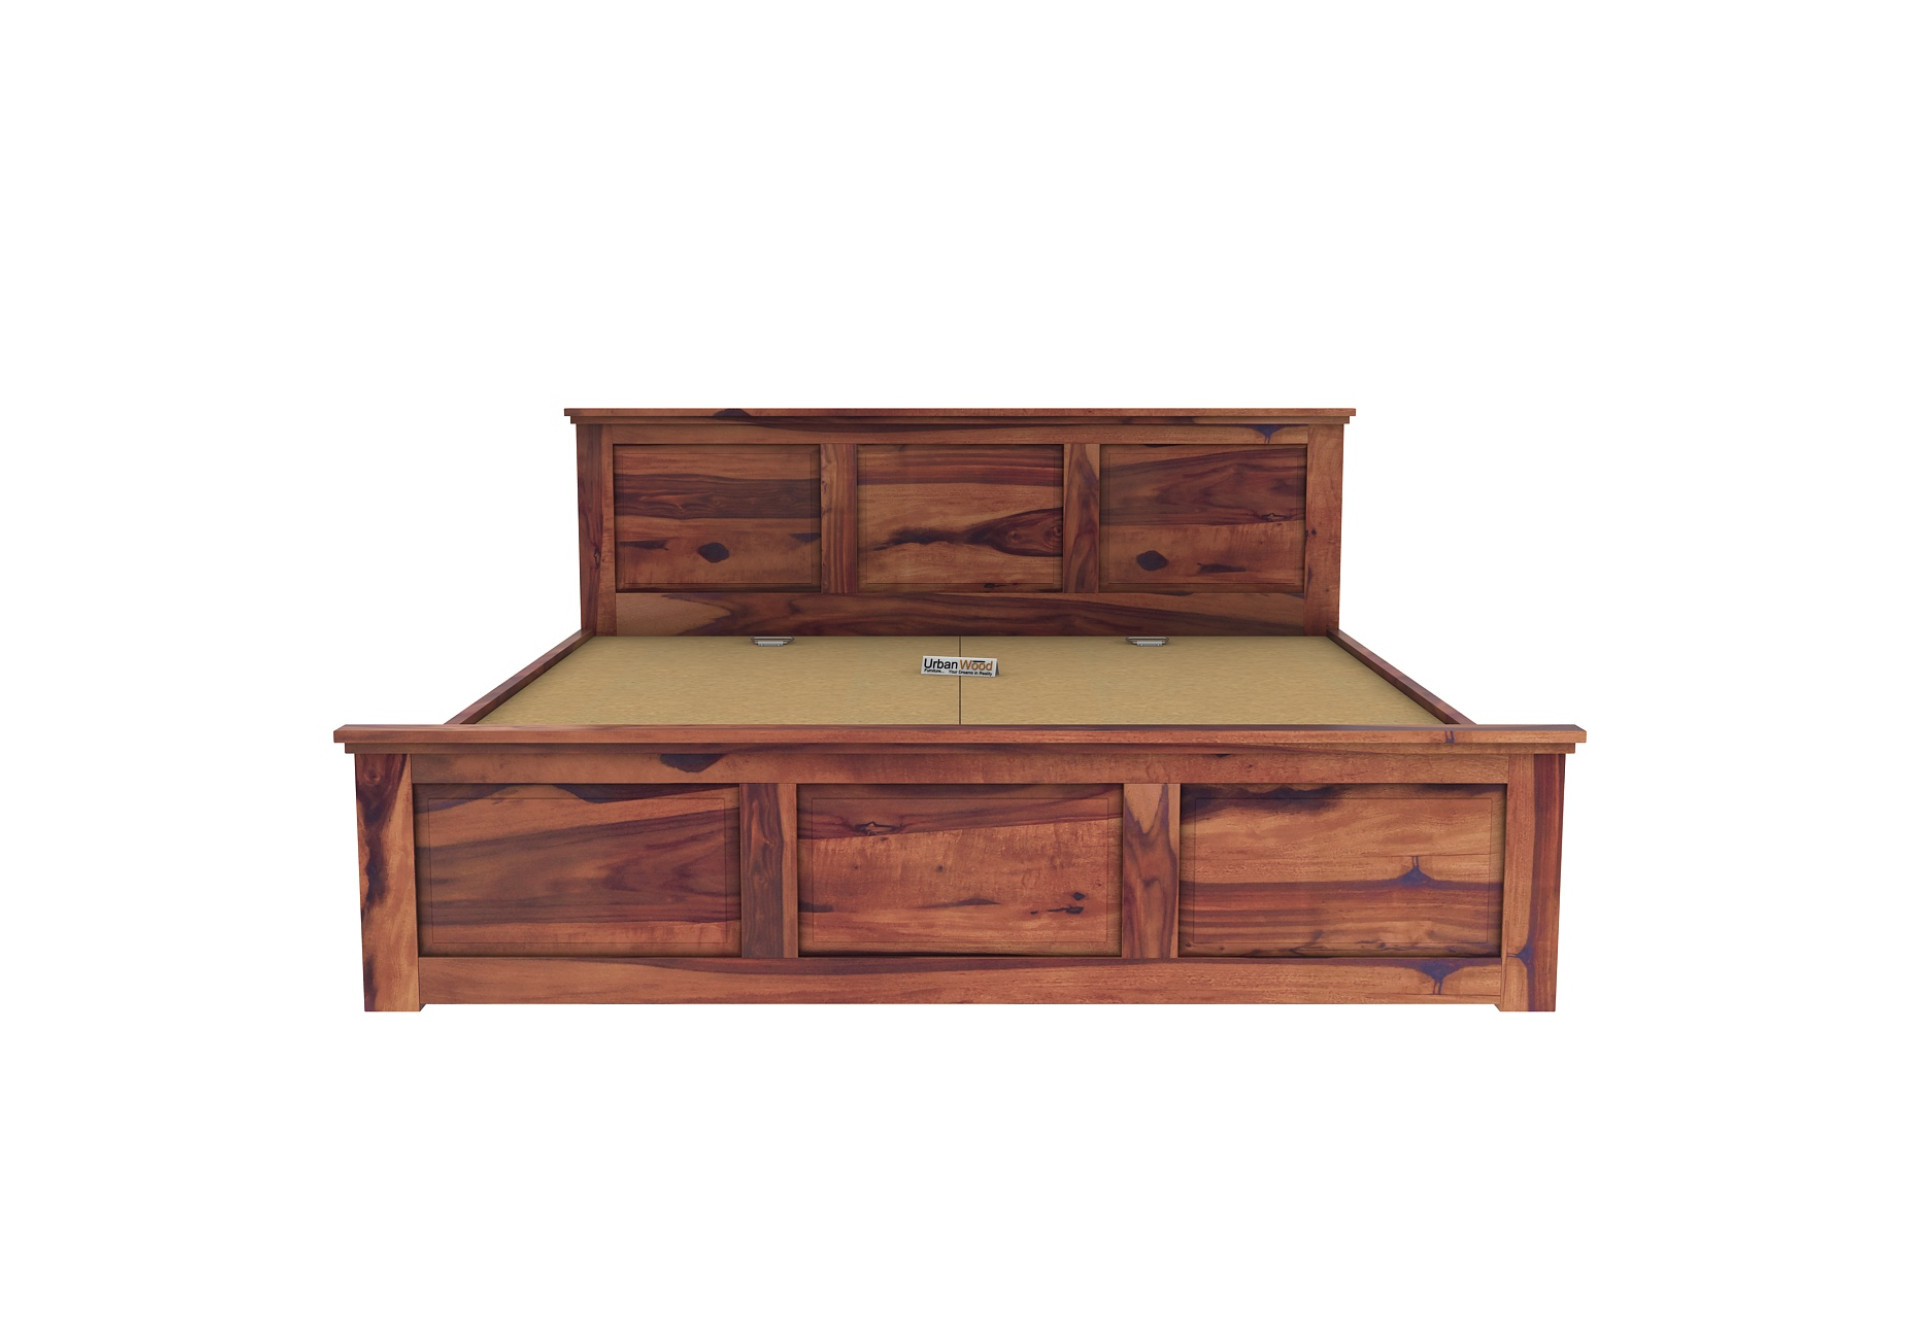 Babson Without Storage Bed (King Size, Teak Finish)